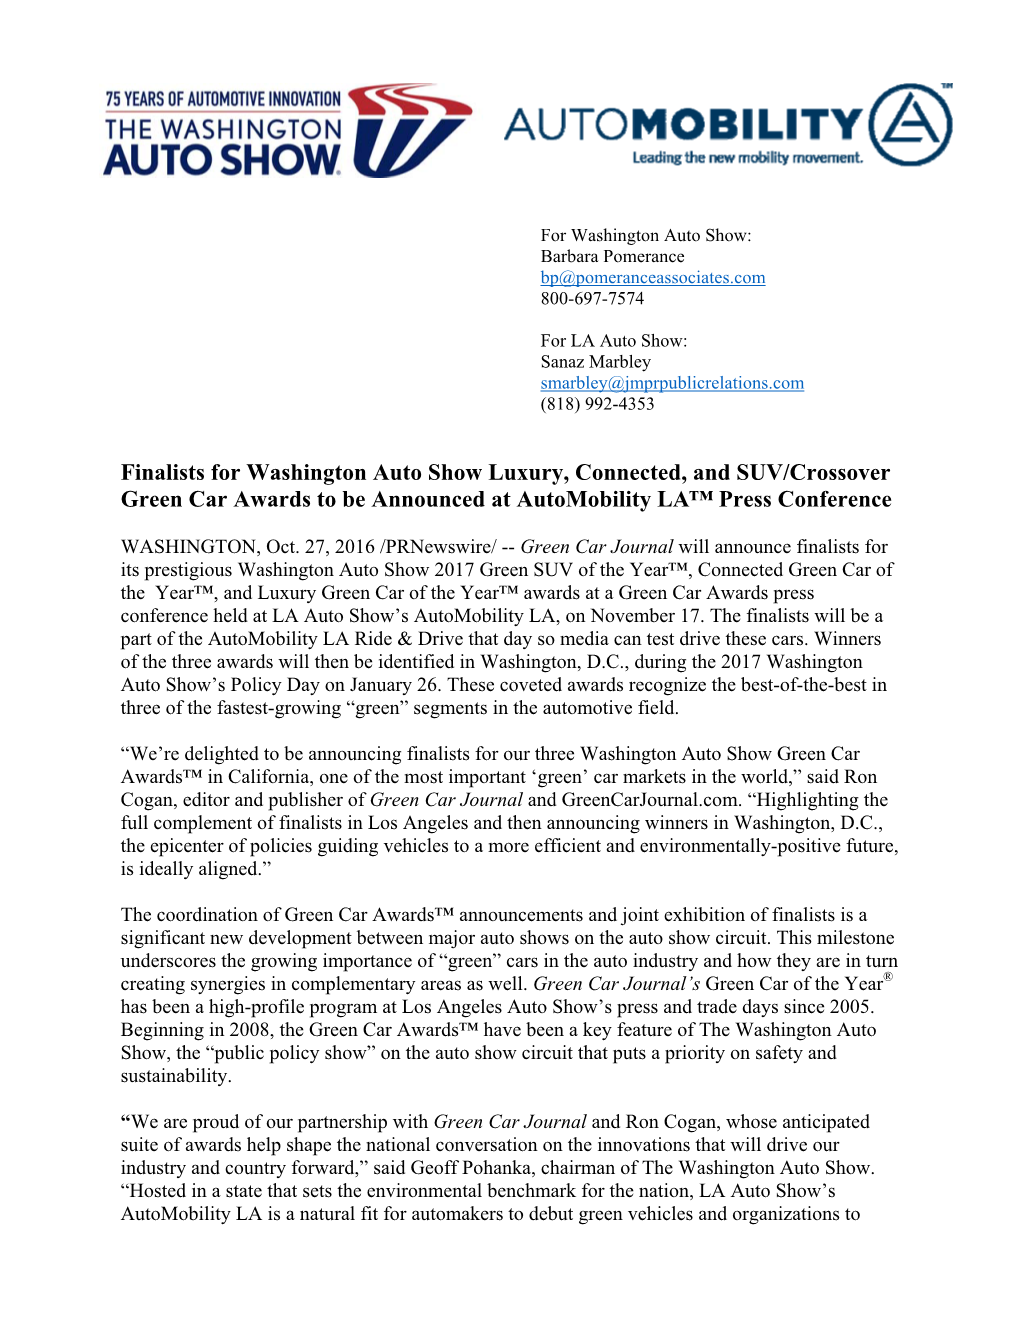 Finalists for Washington Auto Show Luxury, Connected, and SUV/Crossover Green Car Awards to Be Announced at Automobility LA™ Press Conference